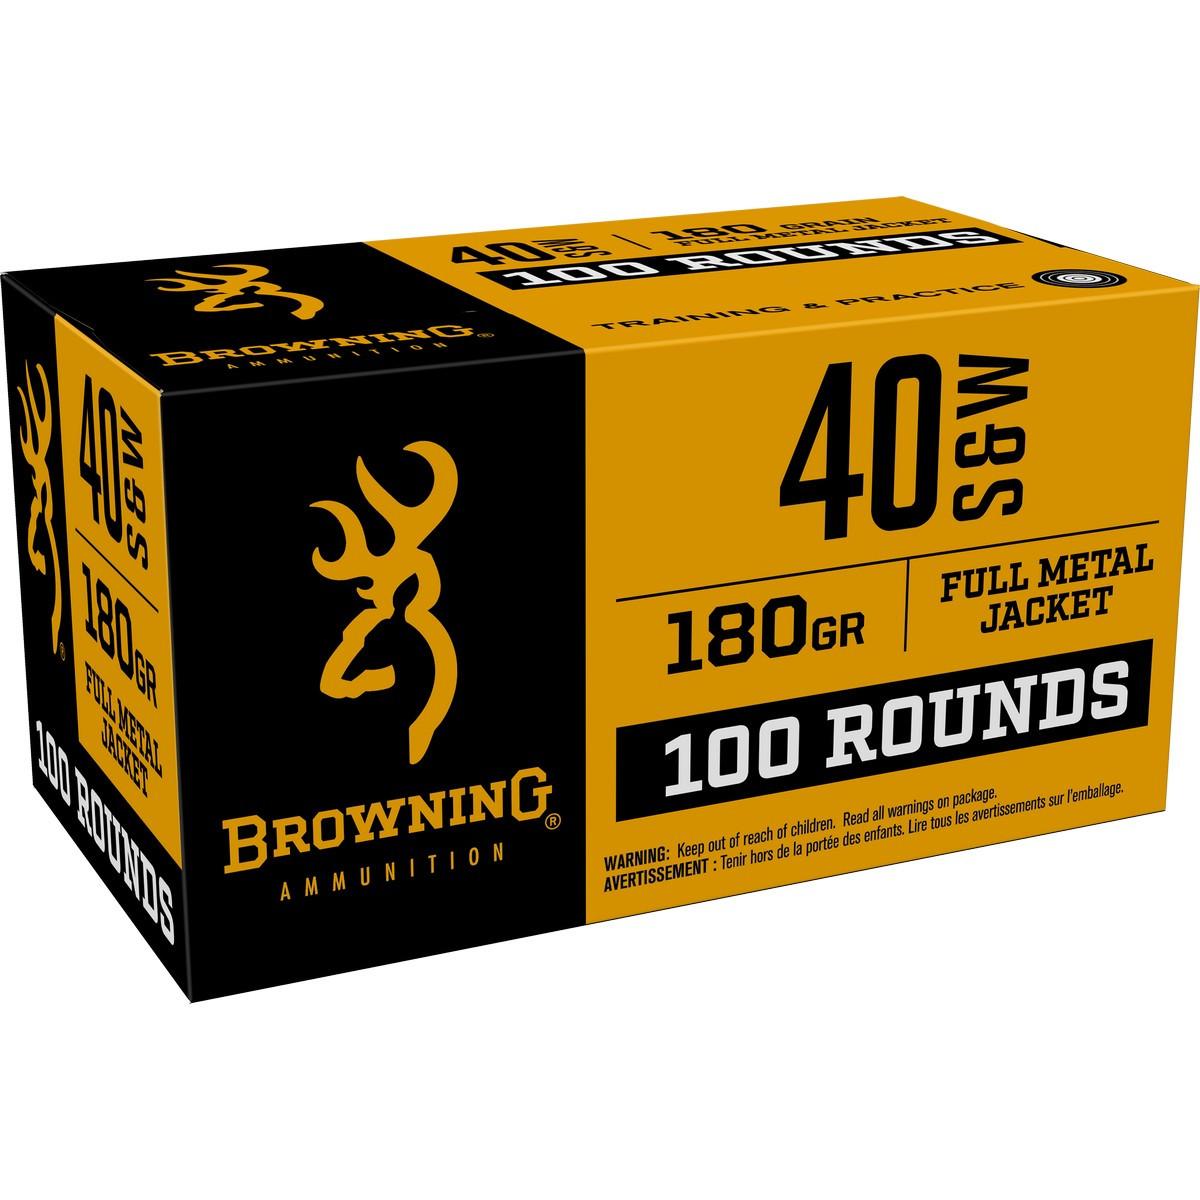  Browning Training Practice 40sw 180gr 100rds